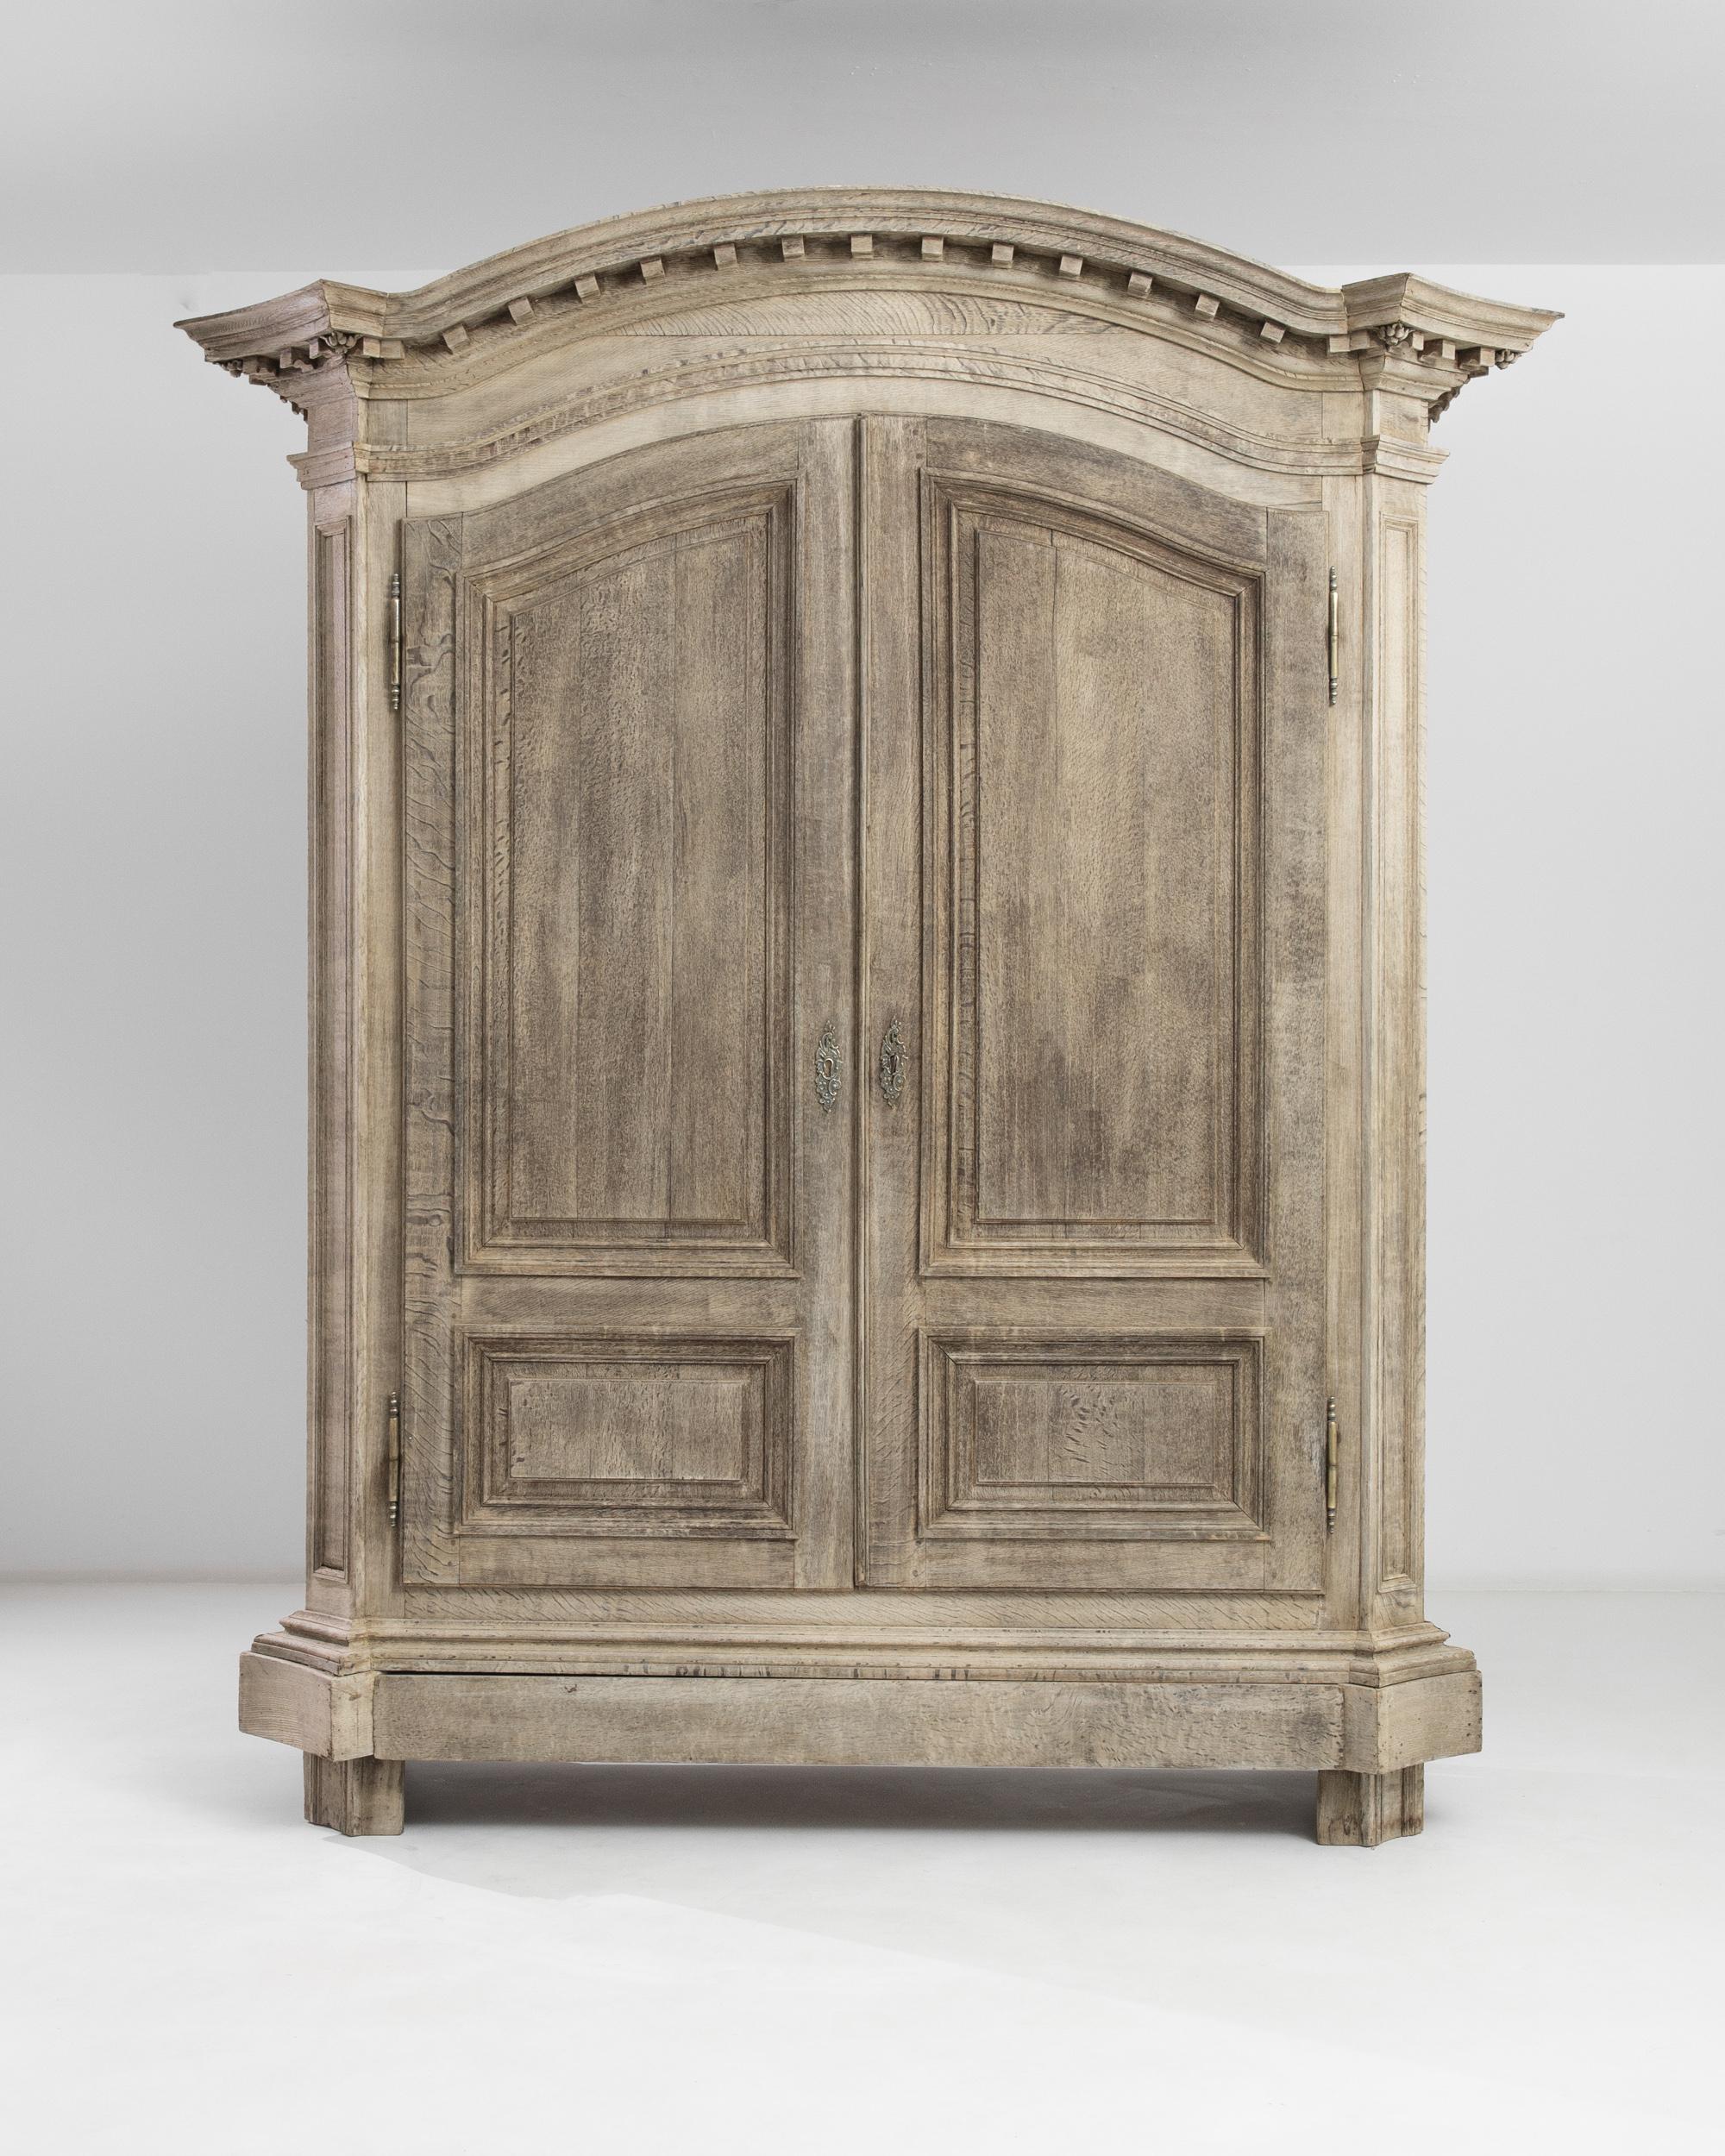 This bleached oak armoire was produced in Belgium, circa 1820. A sturdy case sports three shelves standing on solid bracket feet and cornice base, echoed by a molded top with imposing fortress-like dentils and floral pateras. The tall doors are